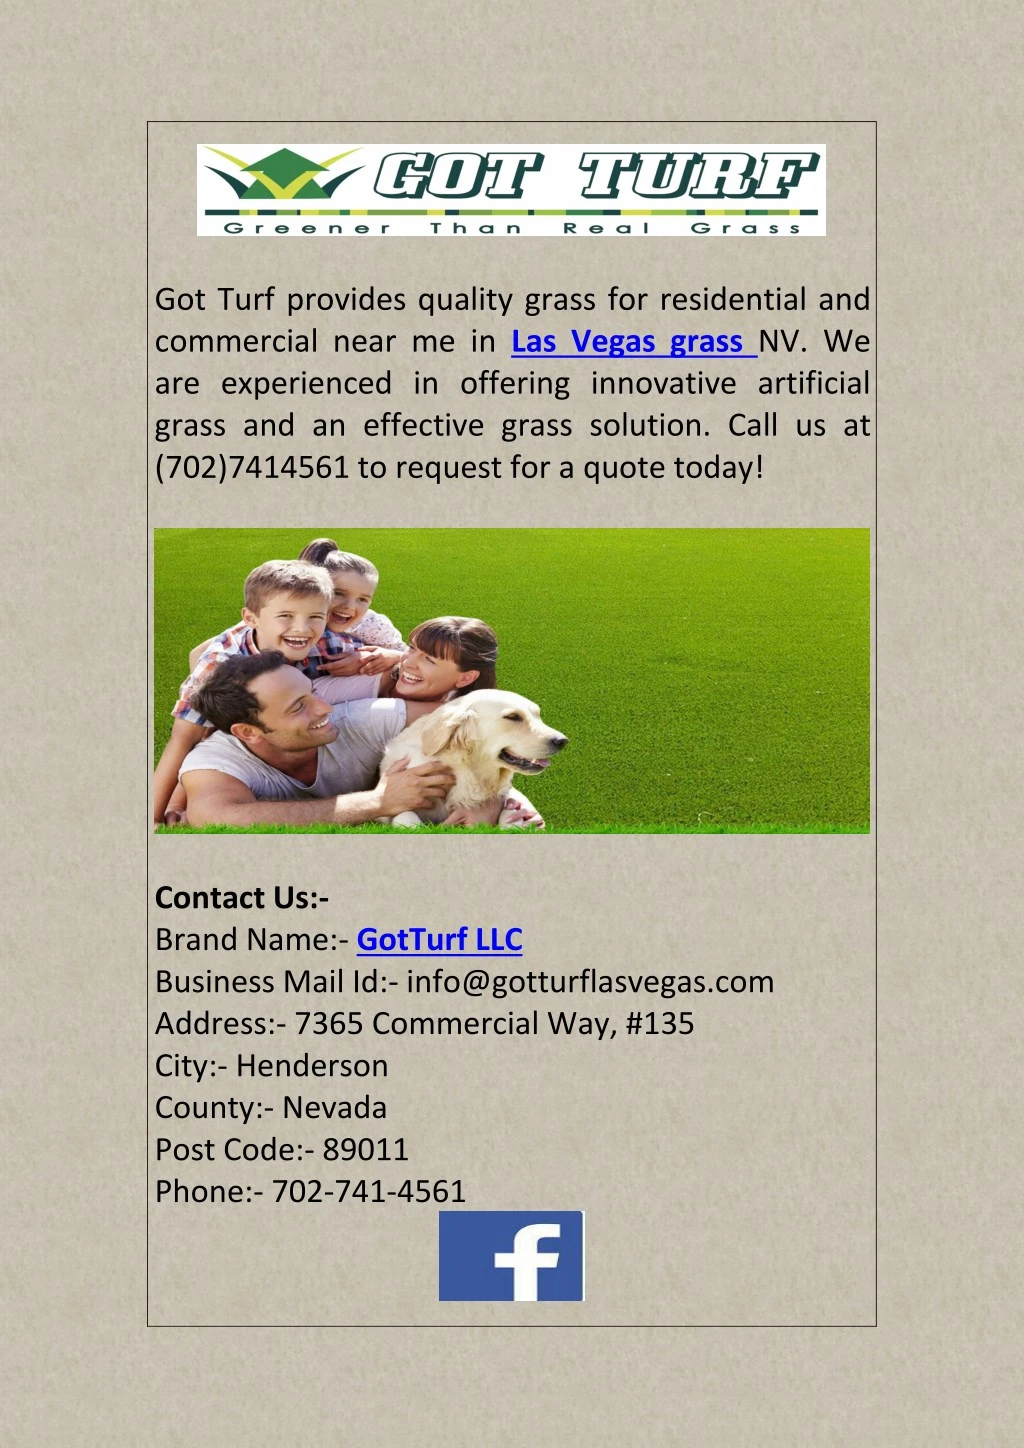 got turf provides quality grass for residential